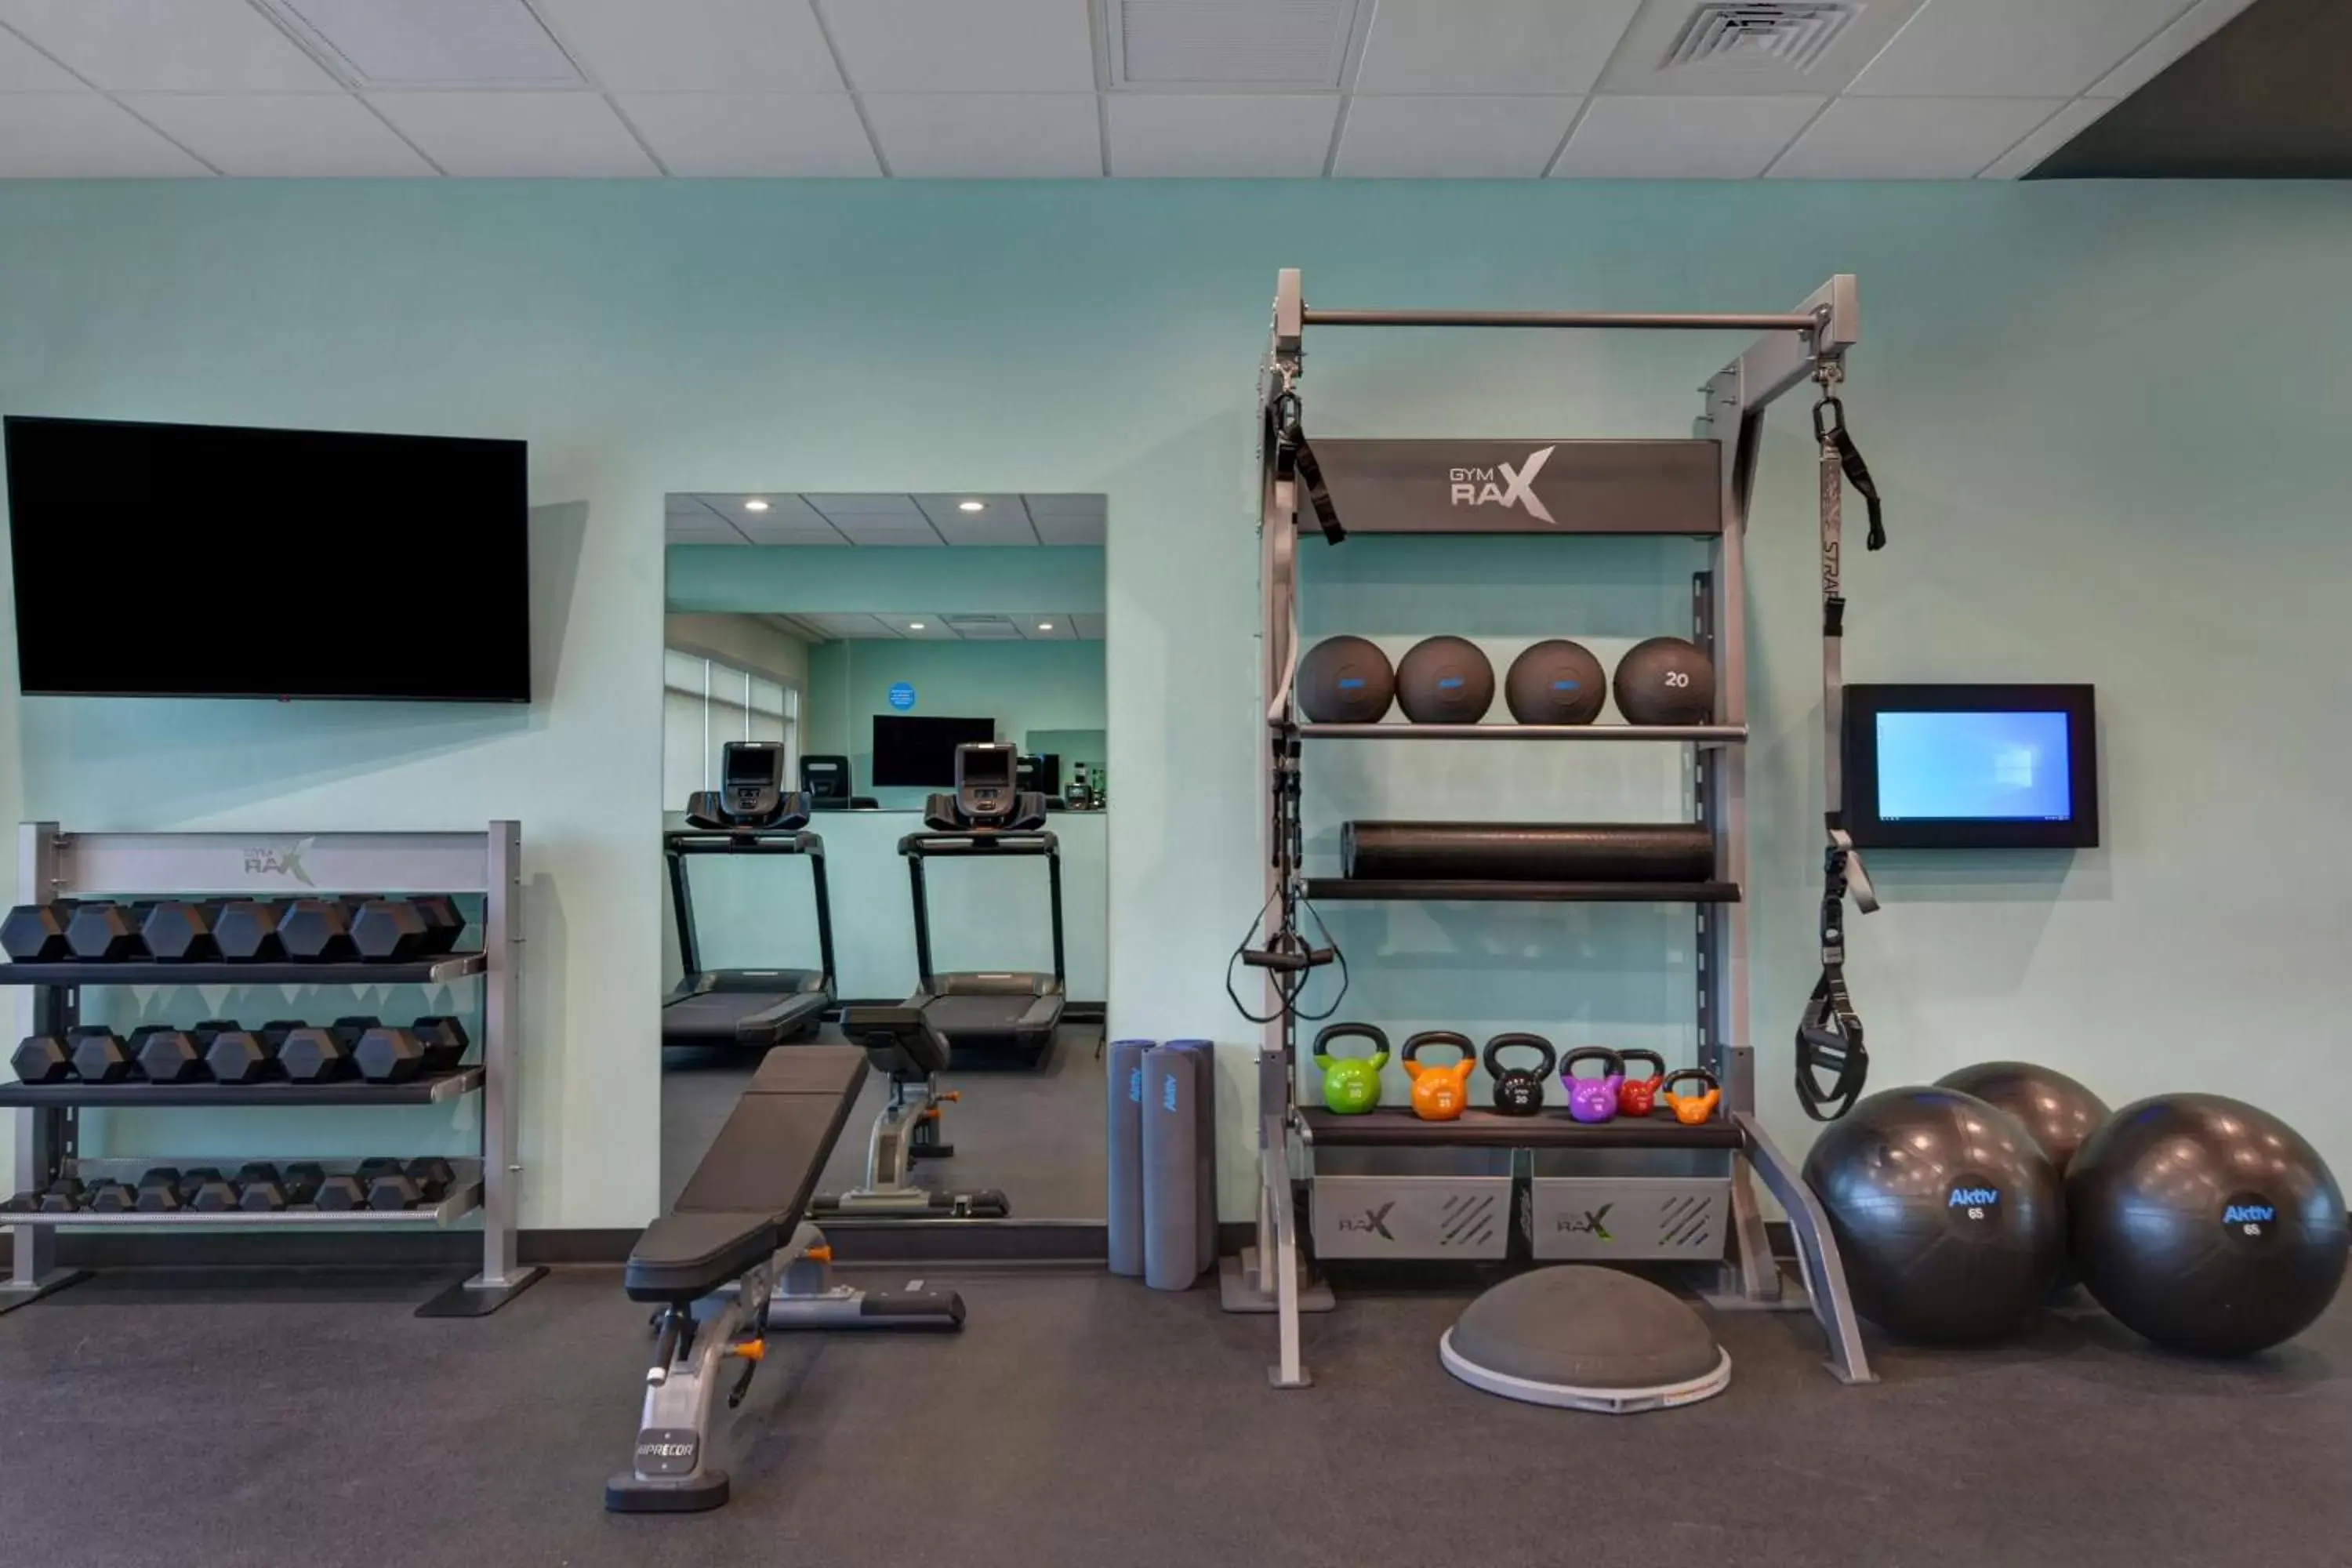 Fitness centre/facilities, Fitness Center/Facilities in Tru By Hilton St. Petersburg Downtown Central Ave